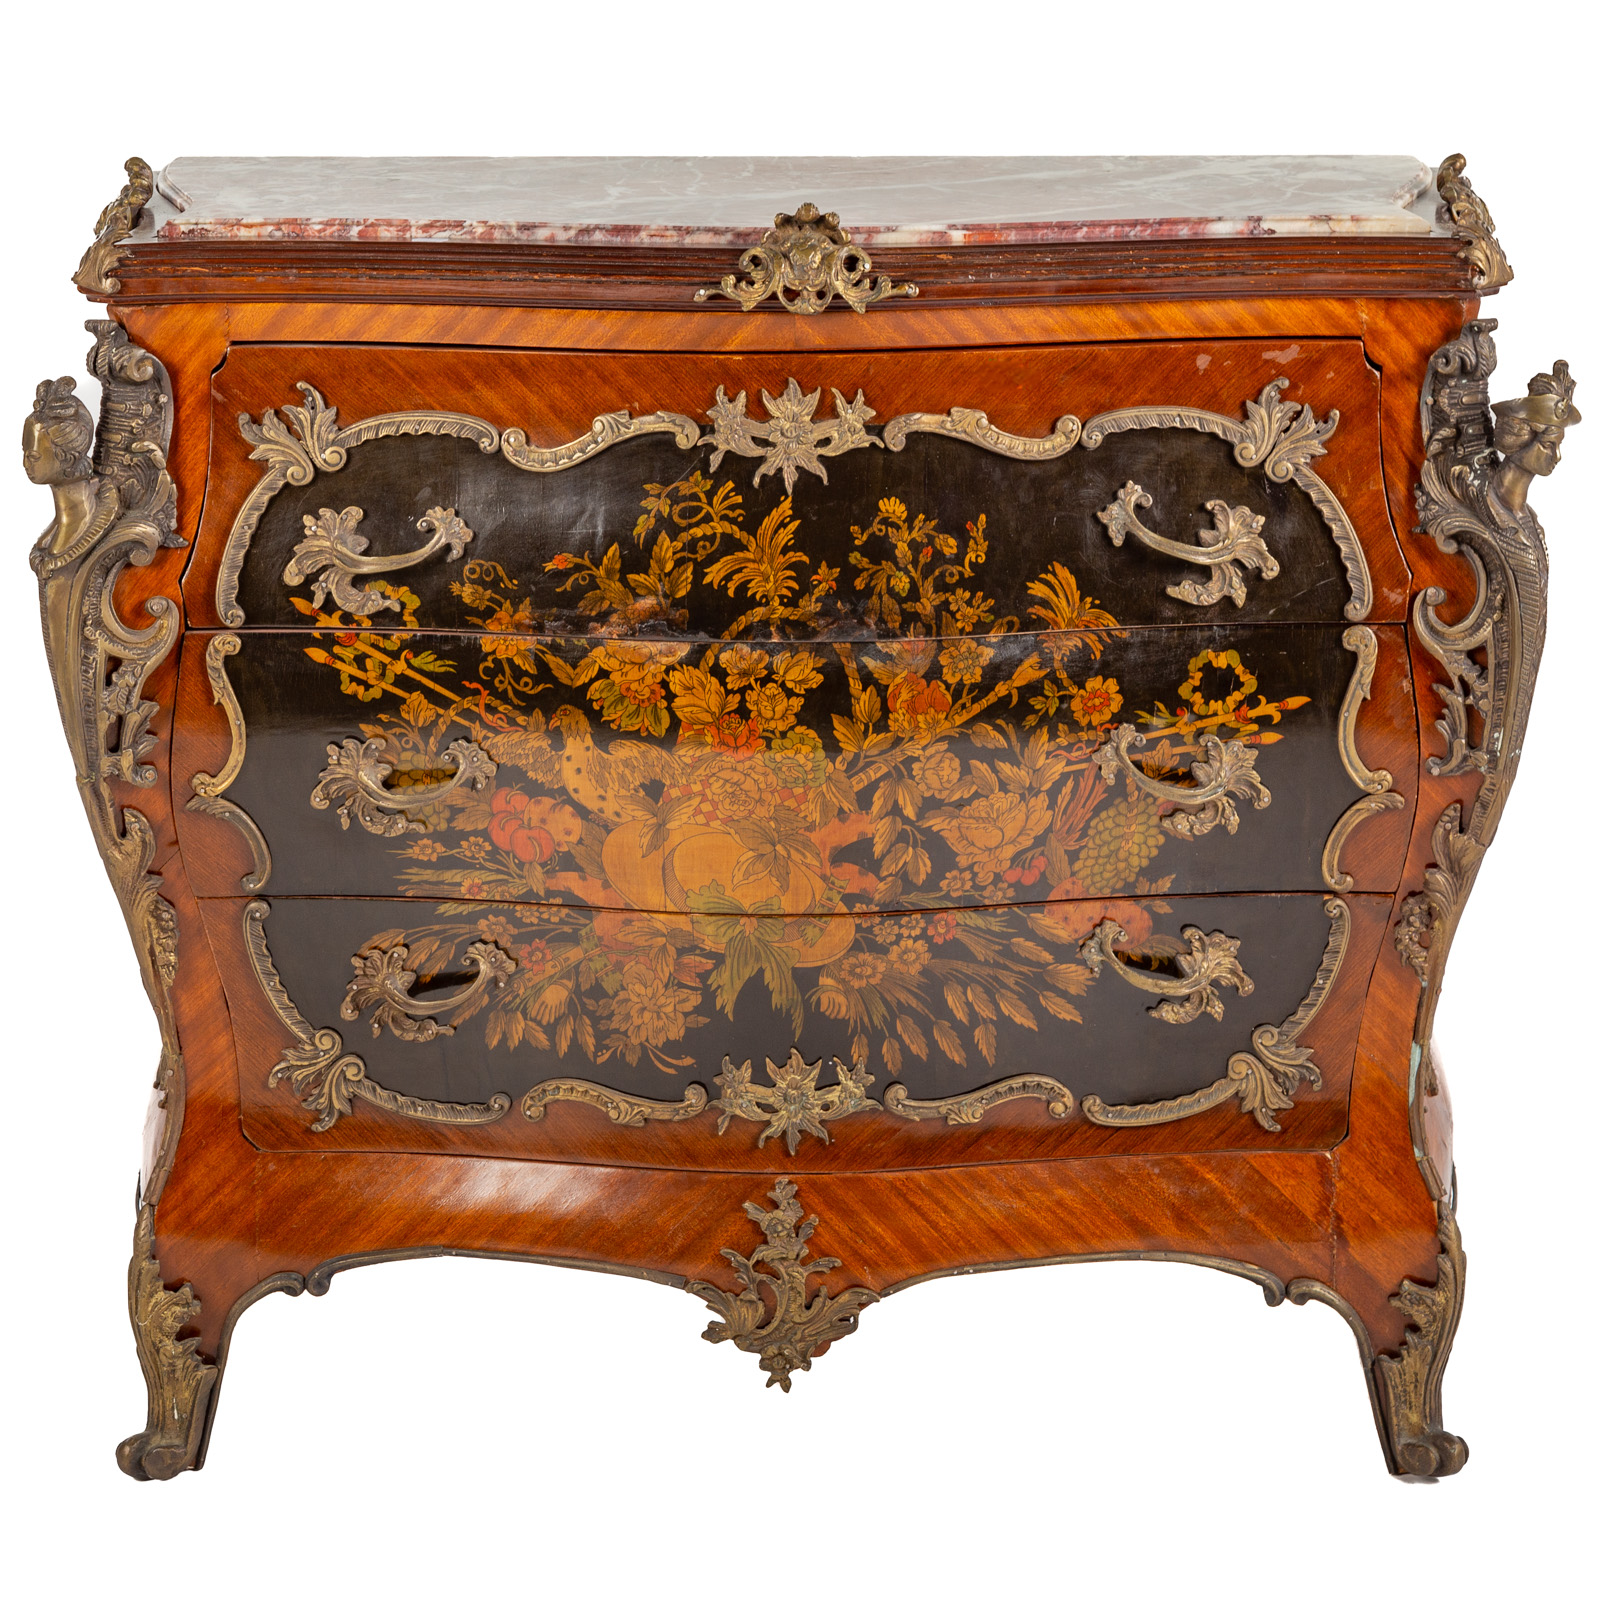 LOUIS XV STYLE MARBLE TOP COMMODE 2e90b0